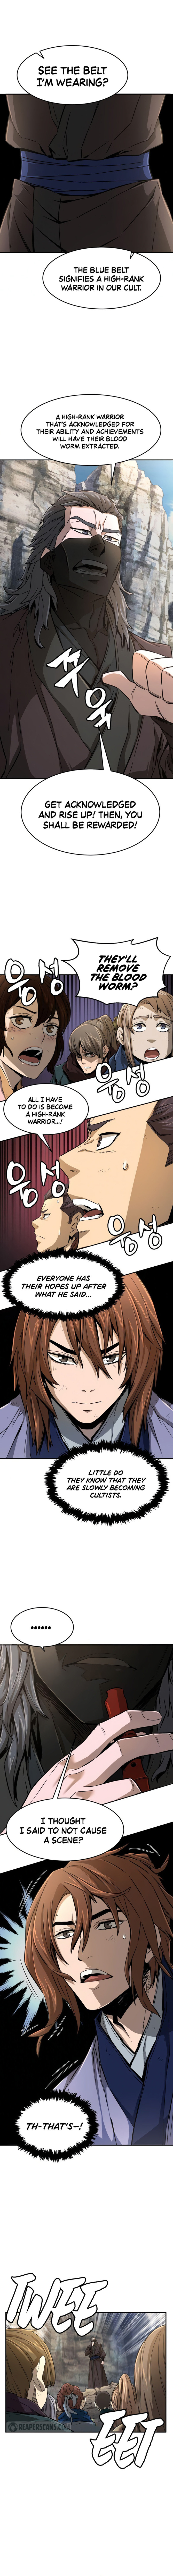 Absolute Sword Sense - Chapter 6 Page 7